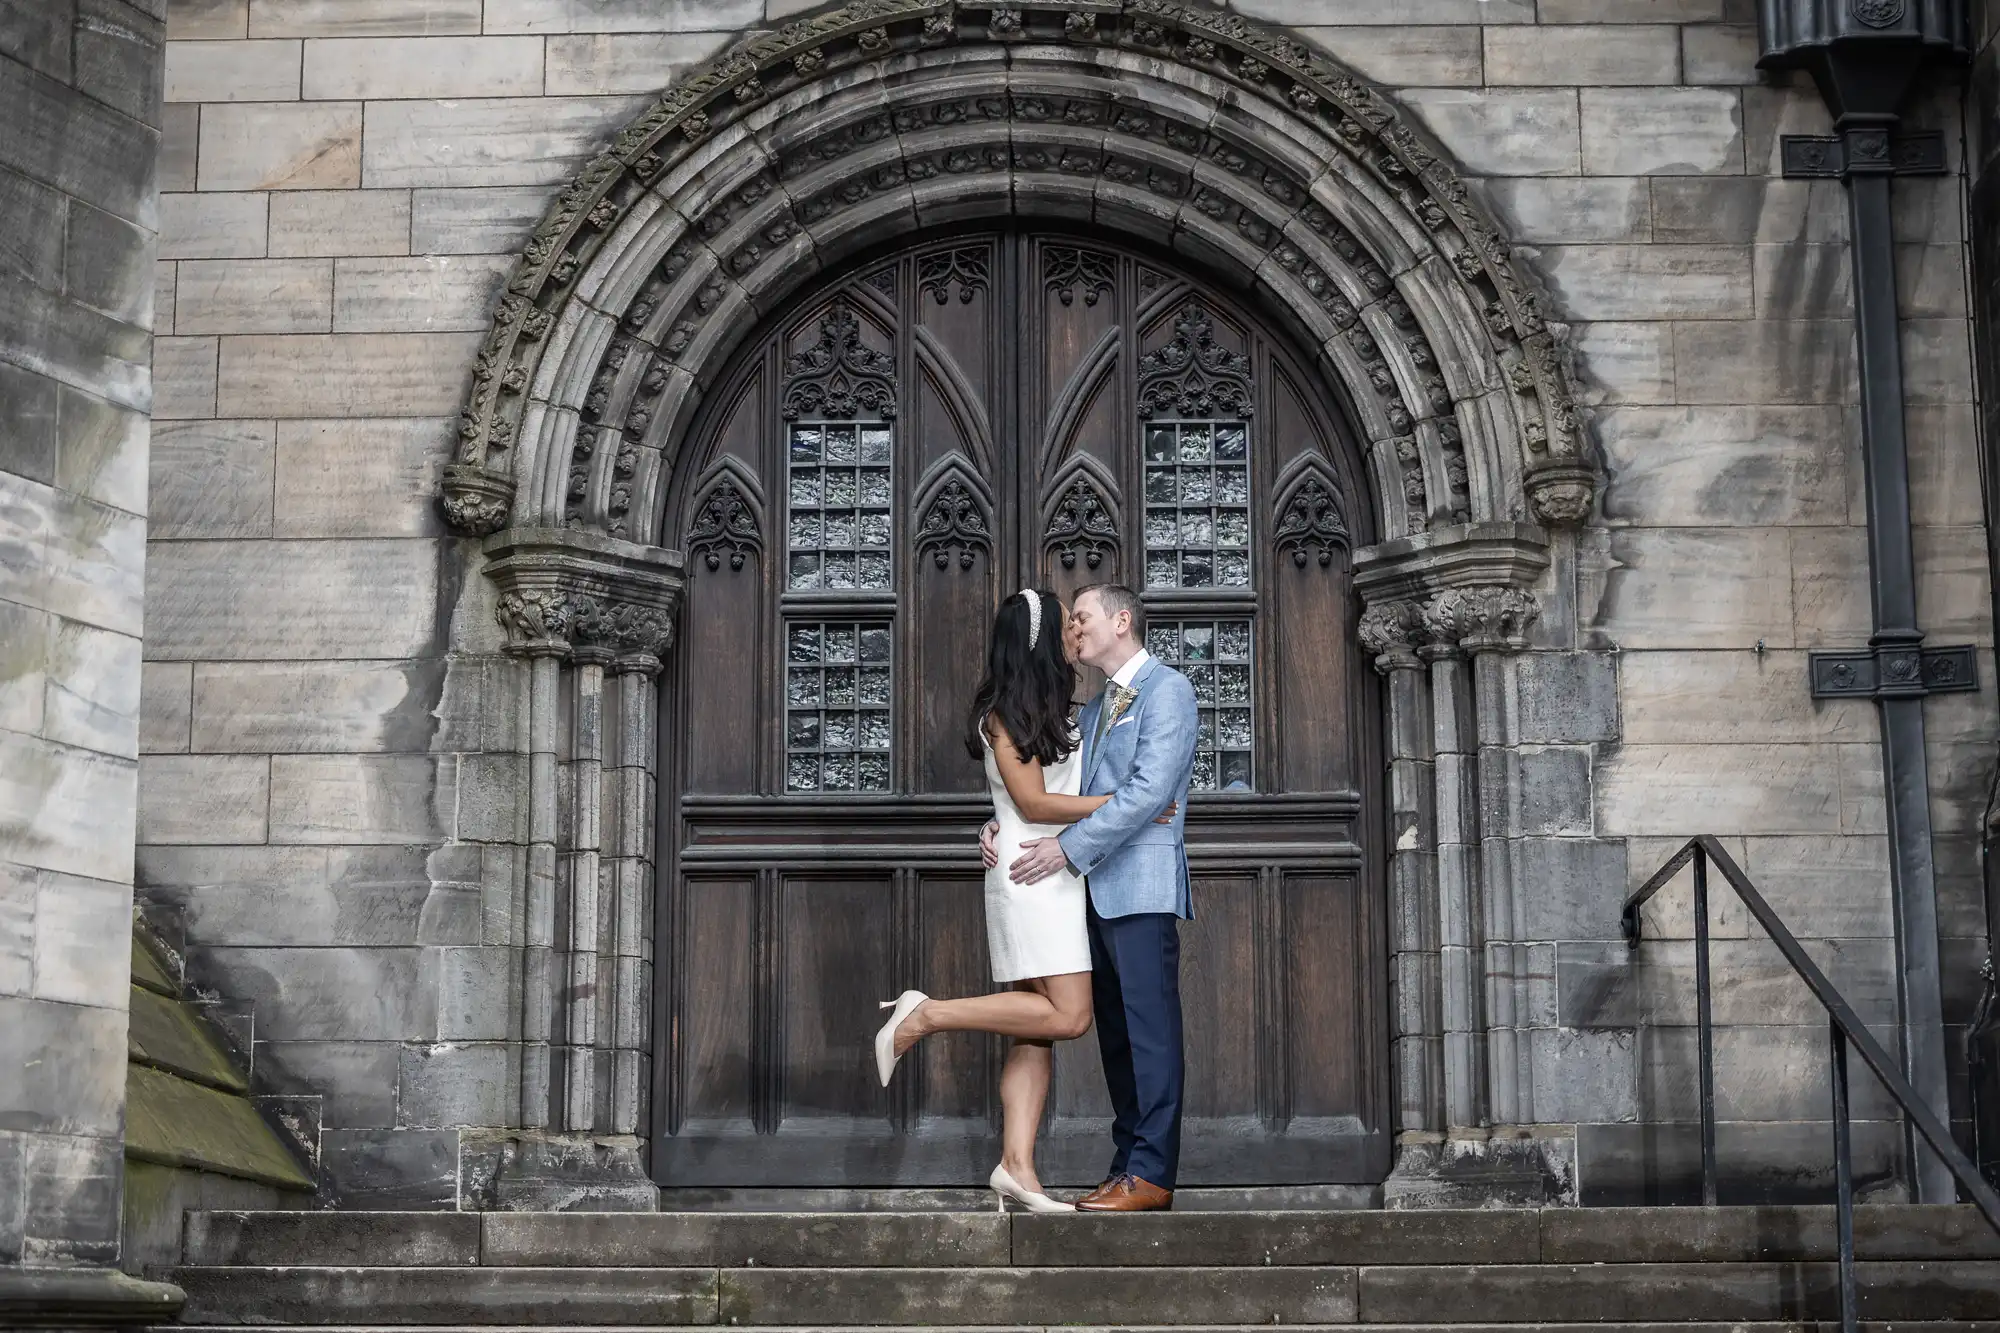 A couple shares a kiss in front of an ornate, arched wooden door of a stone building. The woman is lifting one leg and wearing a white dress, while the man is in a light blue blazer and dark pants.